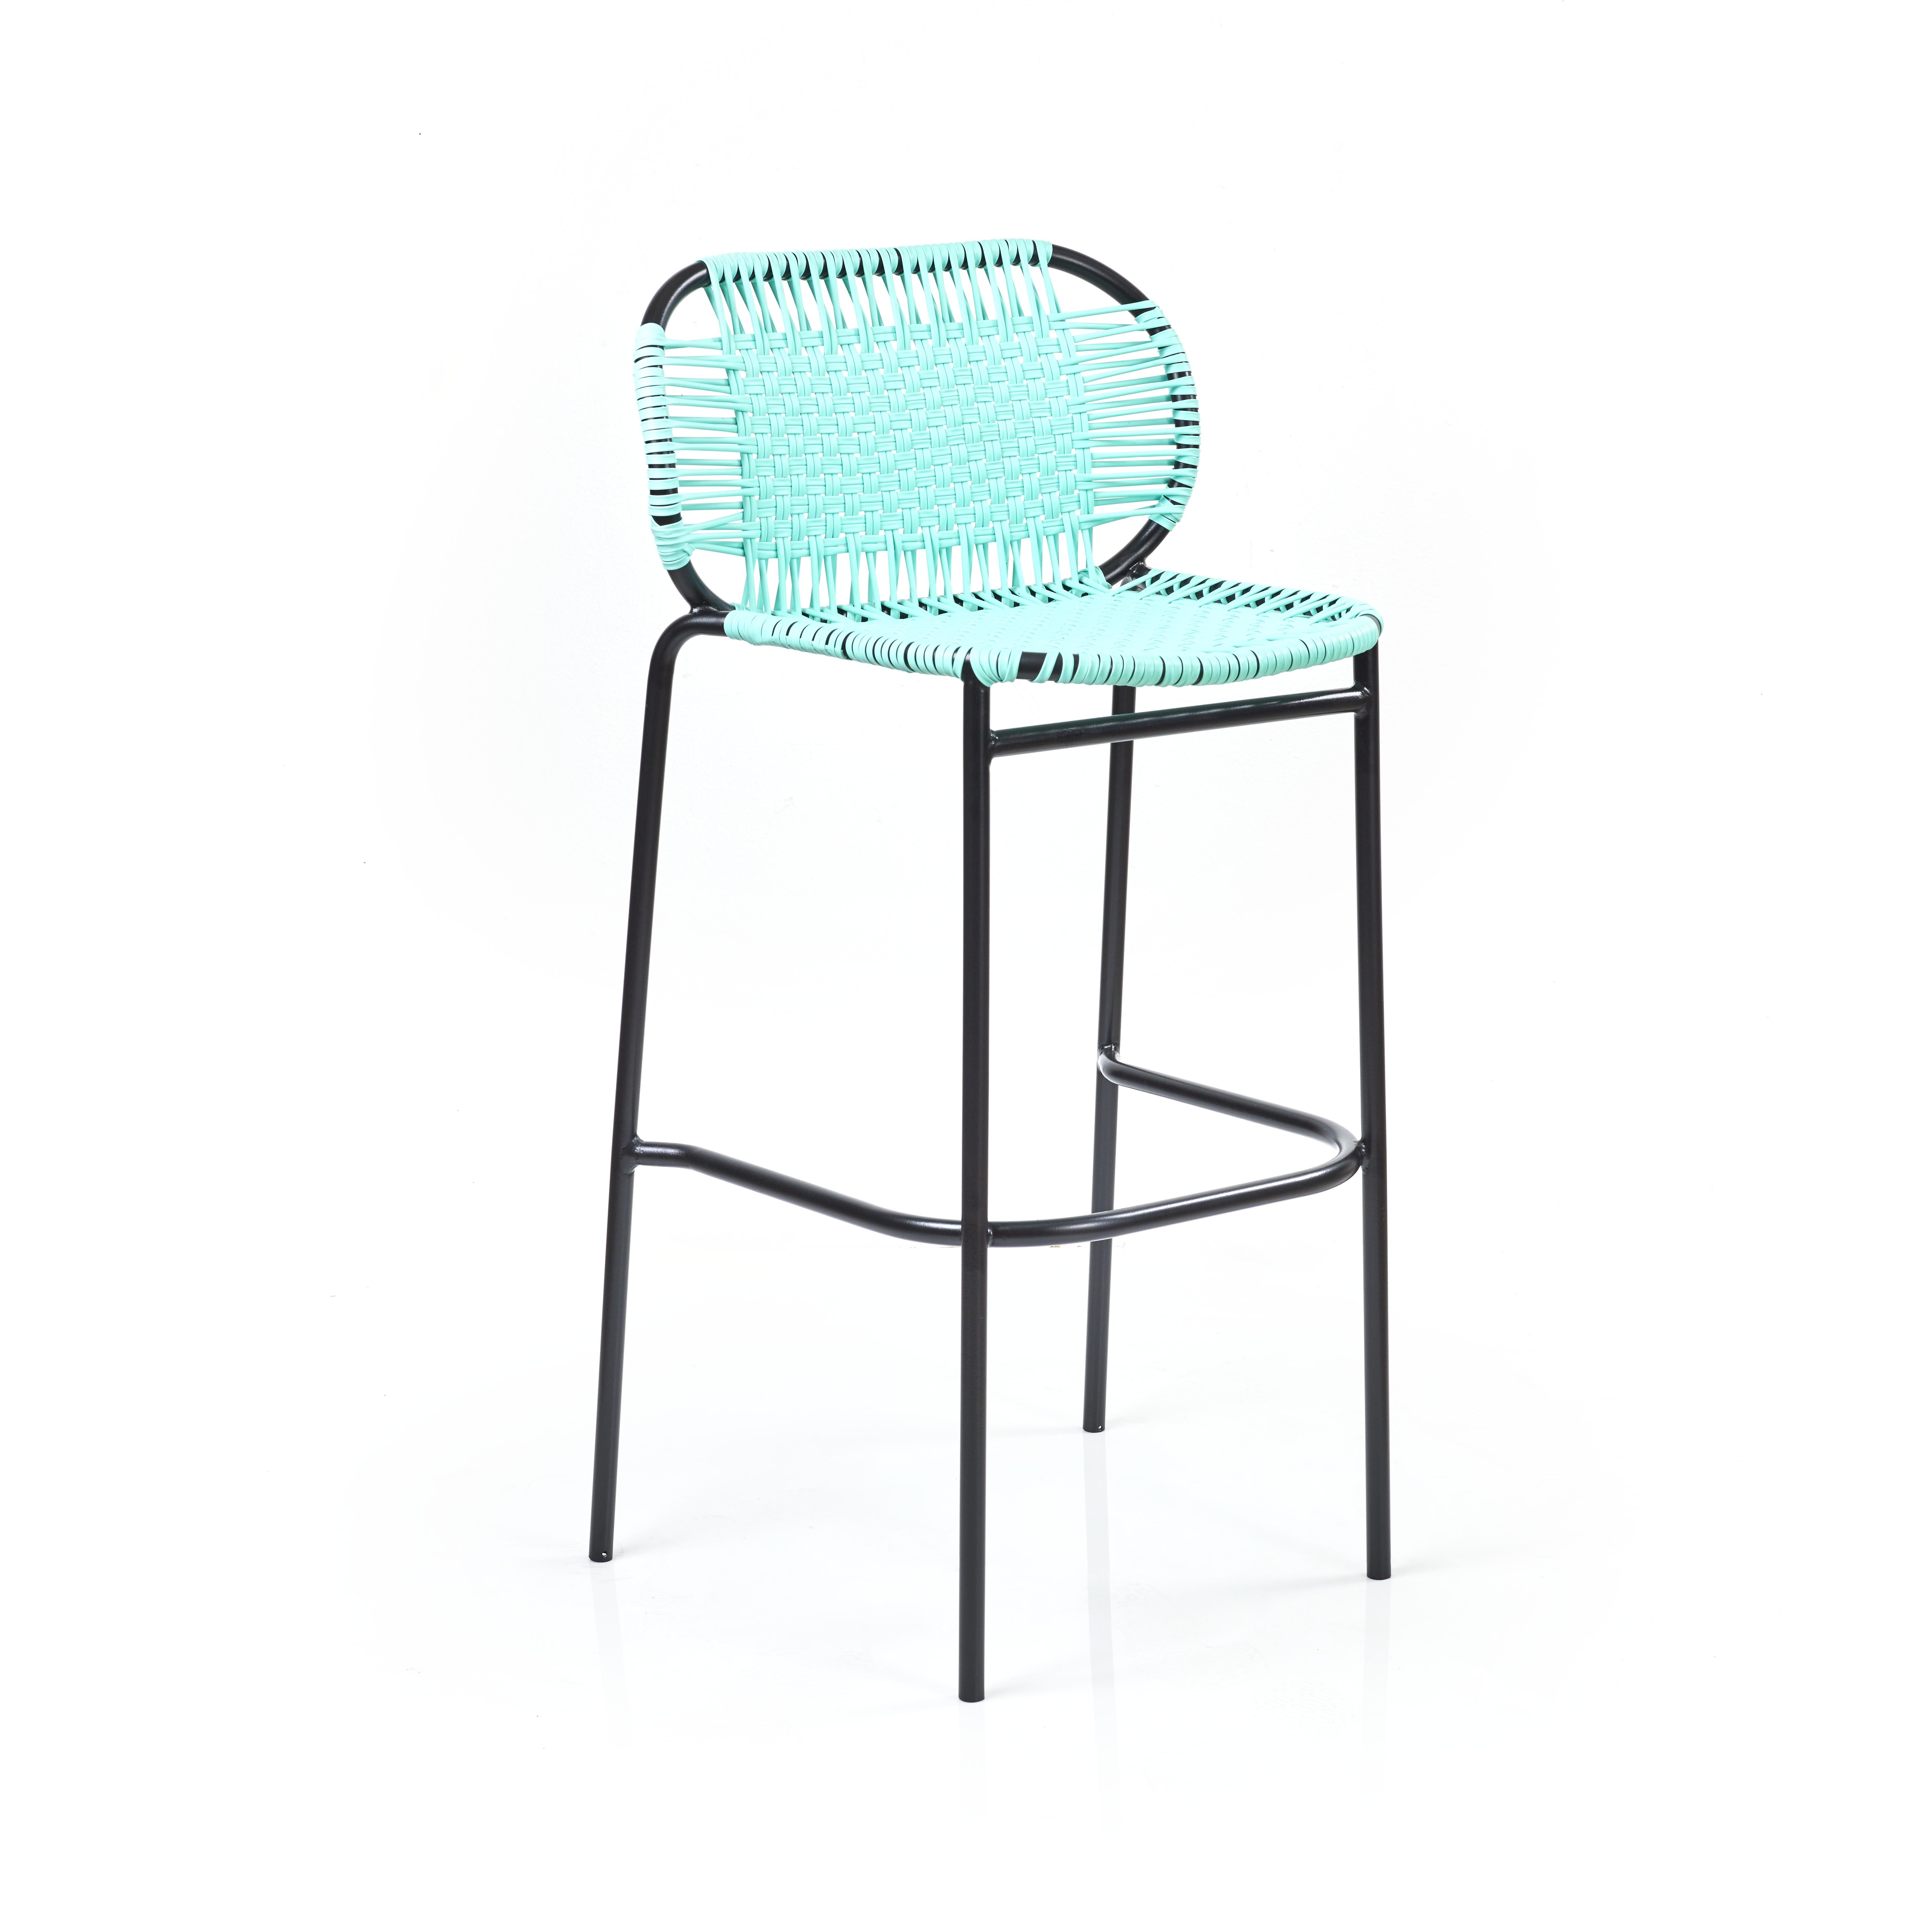 Set of 2 Mint Cielo bar stool by Sebastian Herkner
Materials: Galvanized and powder-coated tubular steel. PVC strings are made from recycled plastic.
Technique: Made from recycled plastic and weaved by local craftspeople in Cartagena, Colombia.